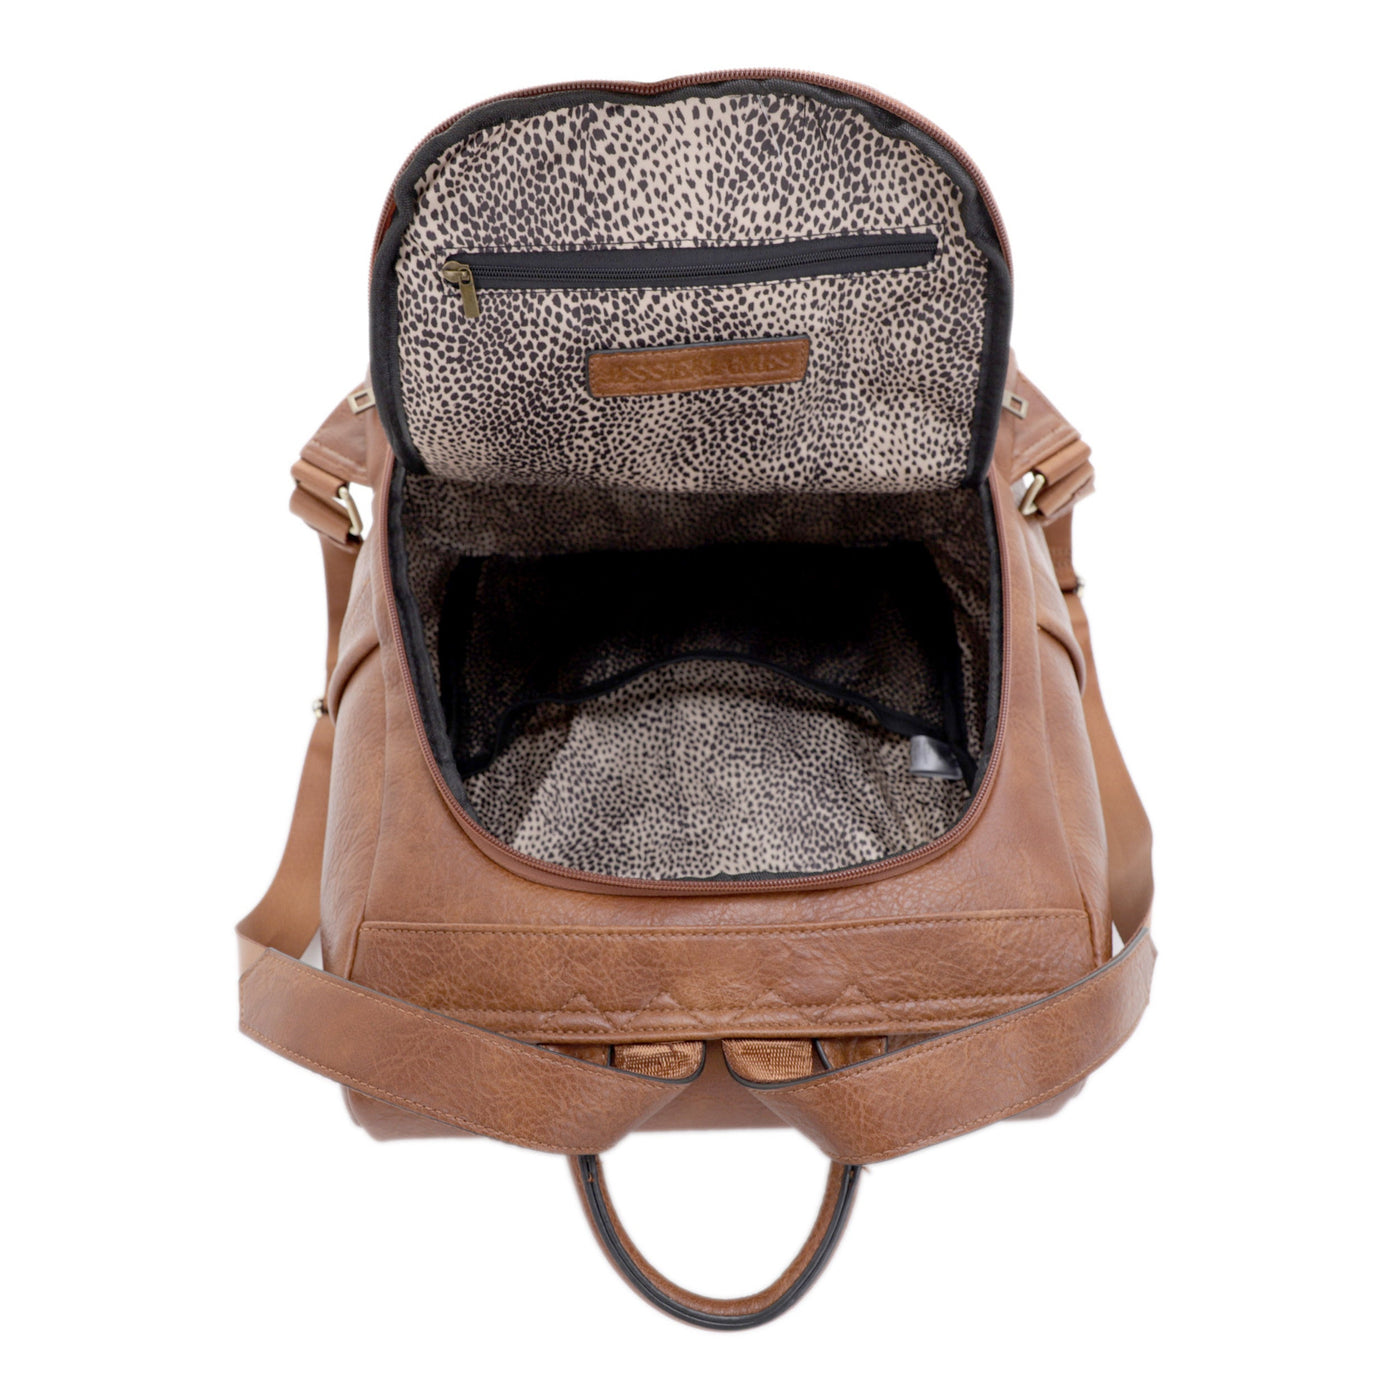 Sierra Concealed Carry Lock and Key Backpack Purse